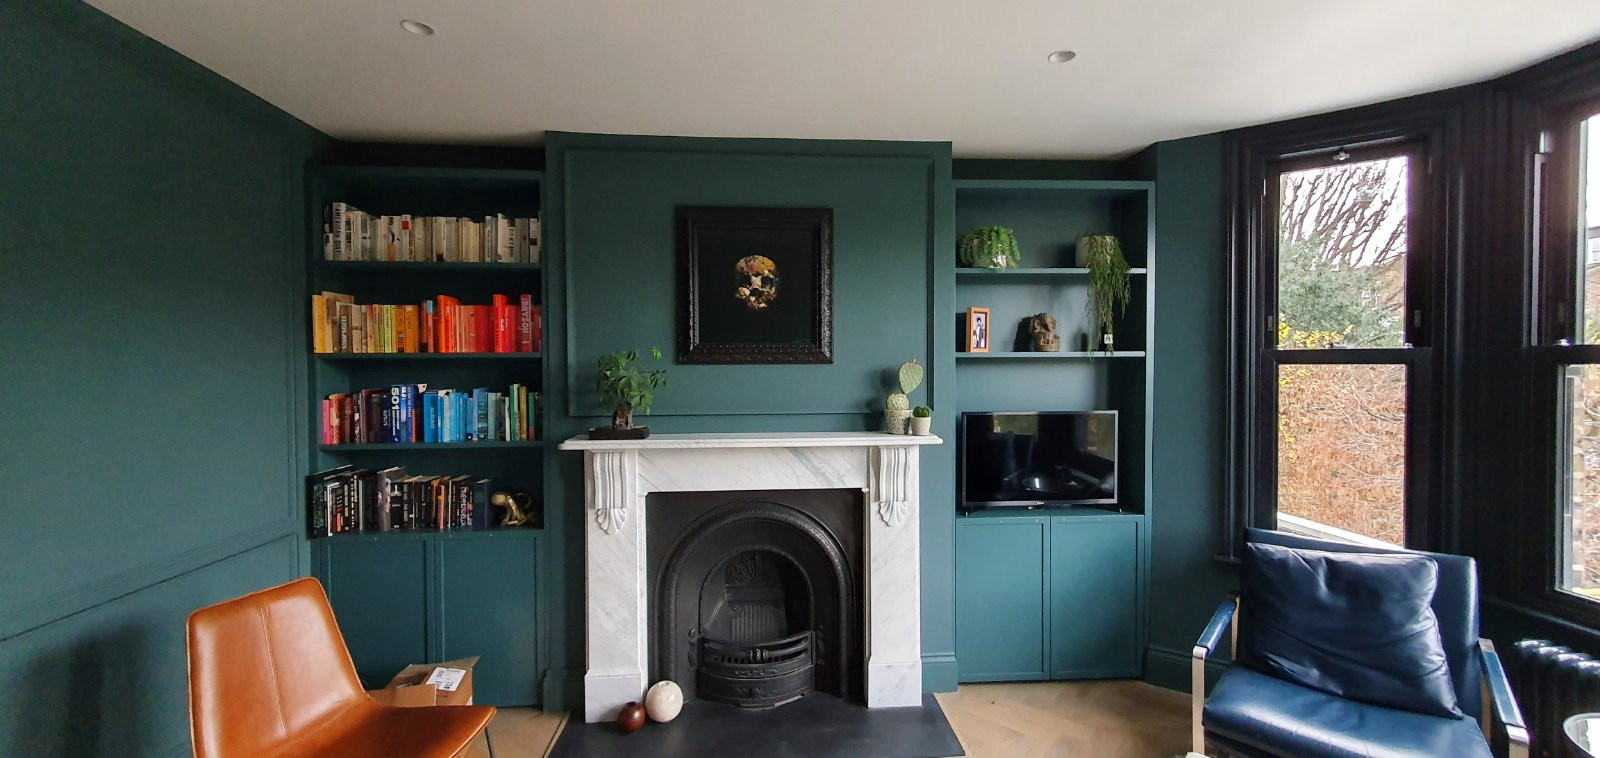 Fitted alcoves